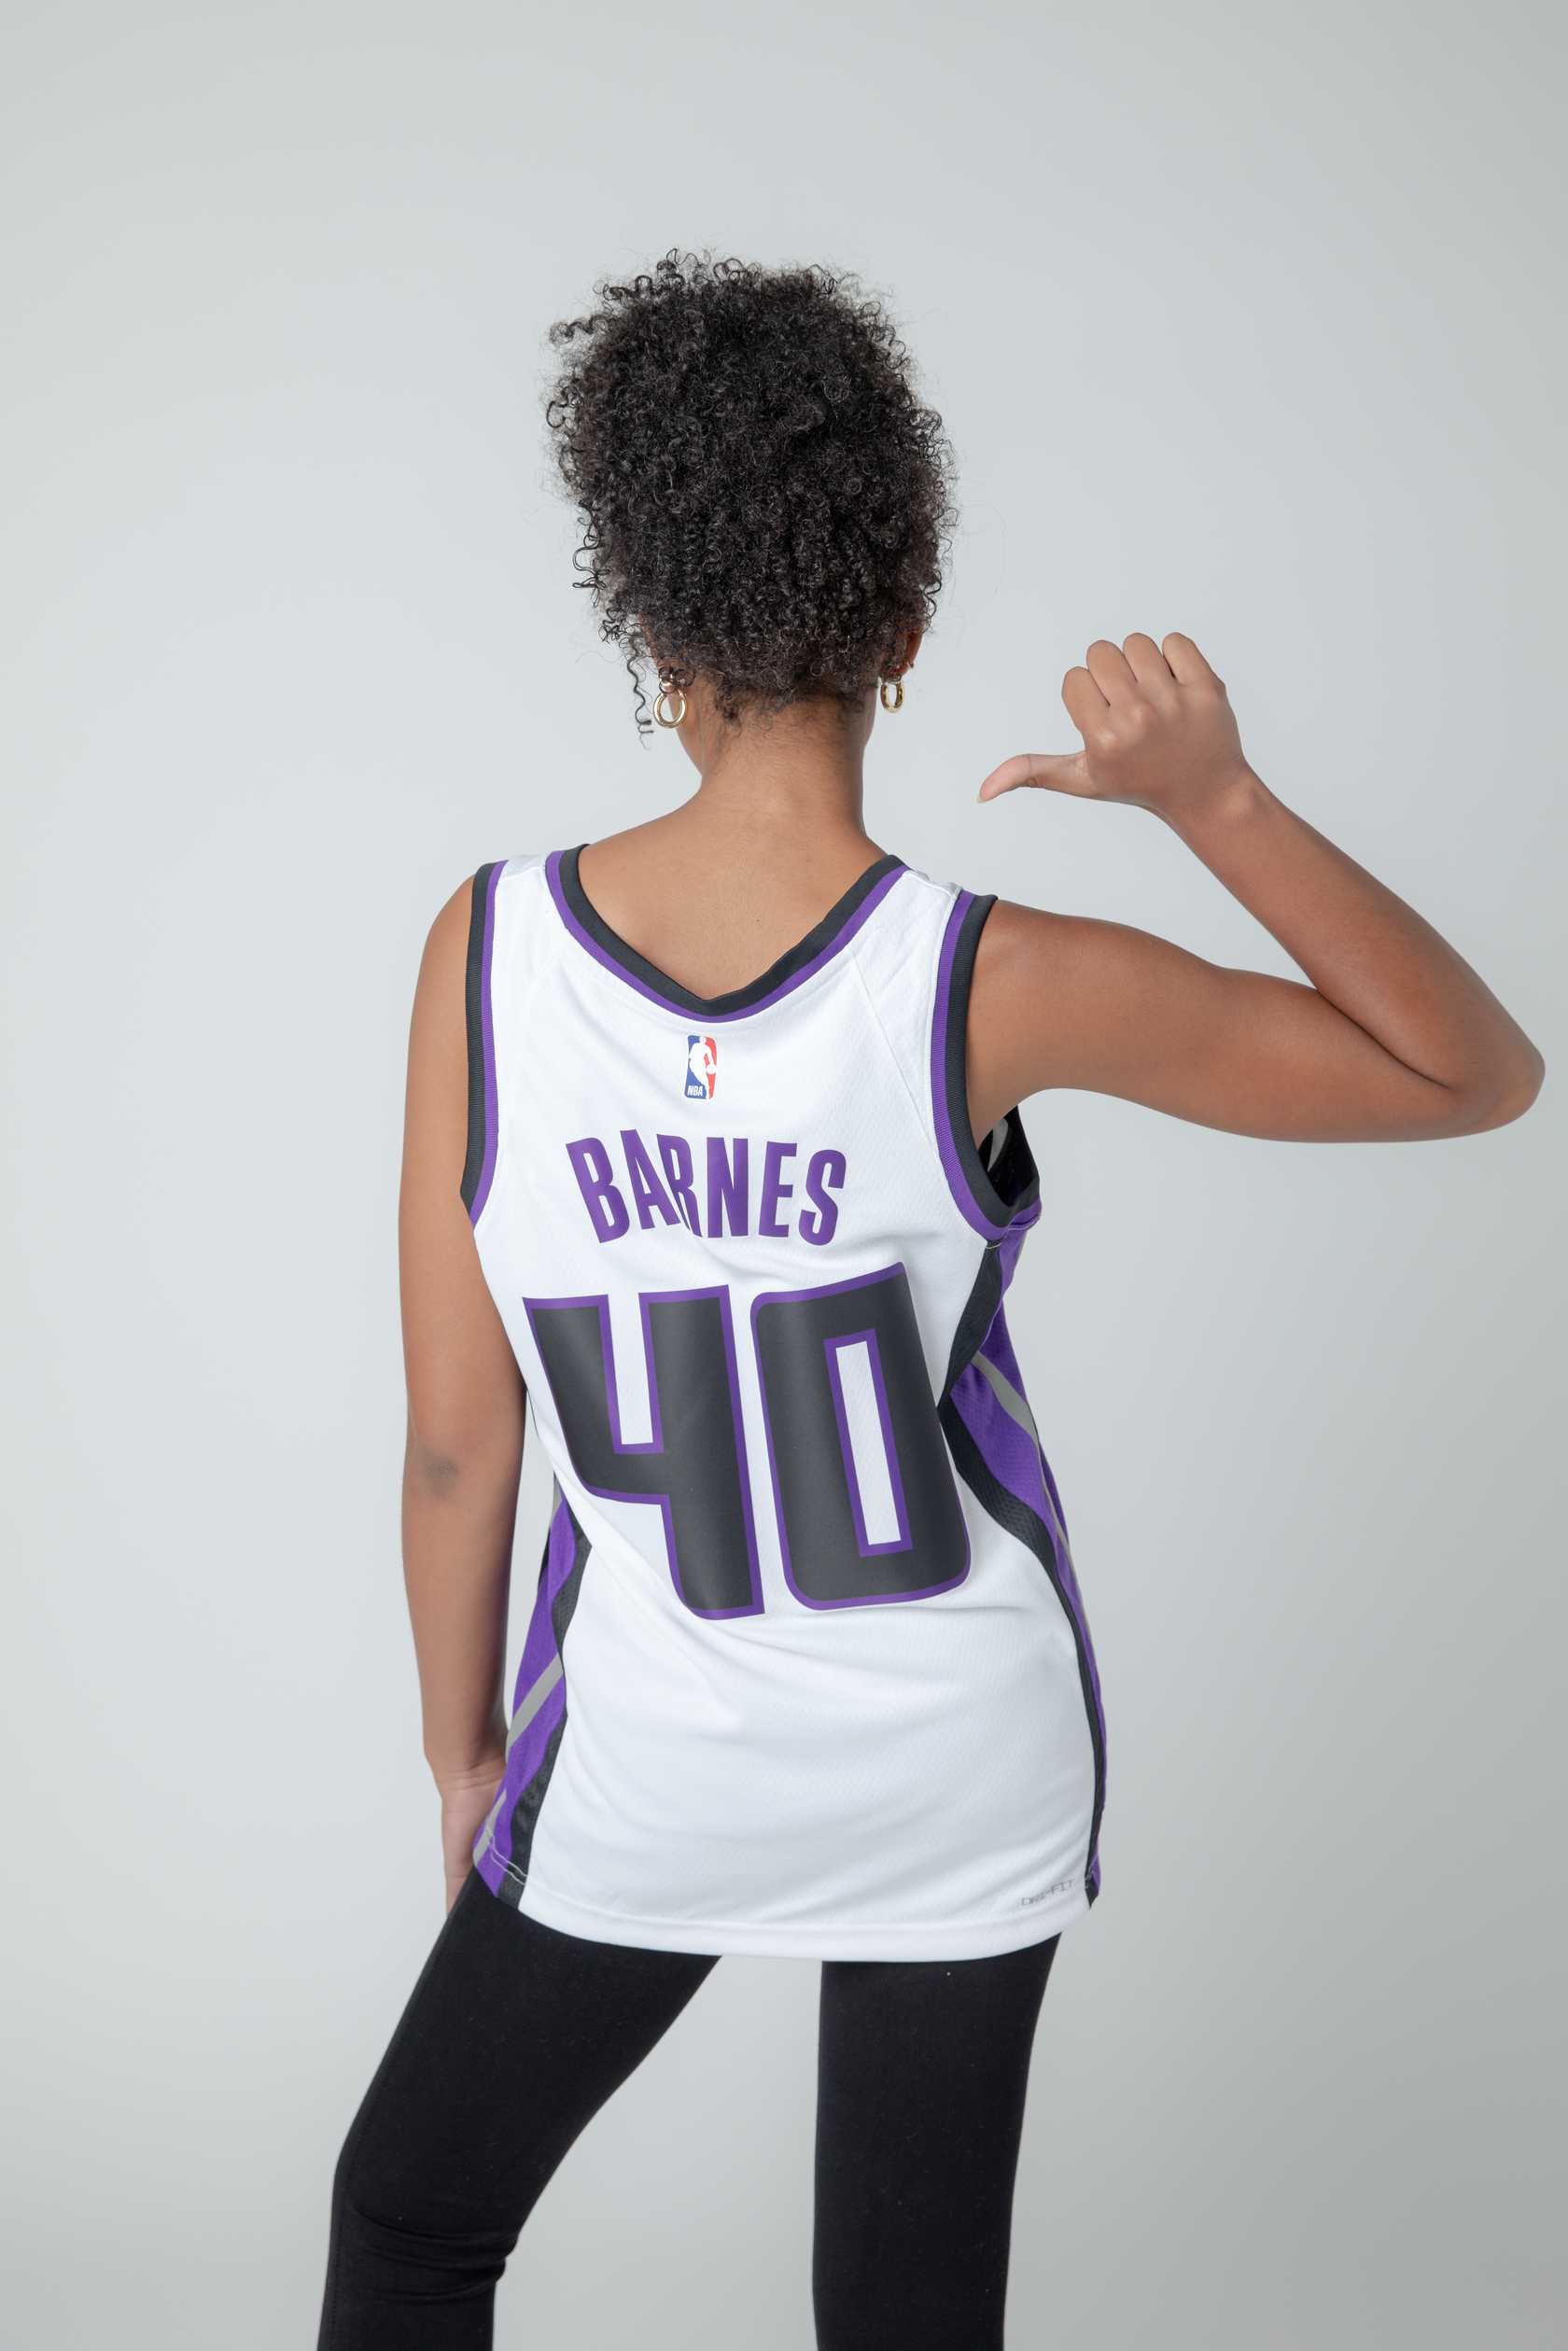 lakers jersey 24 white